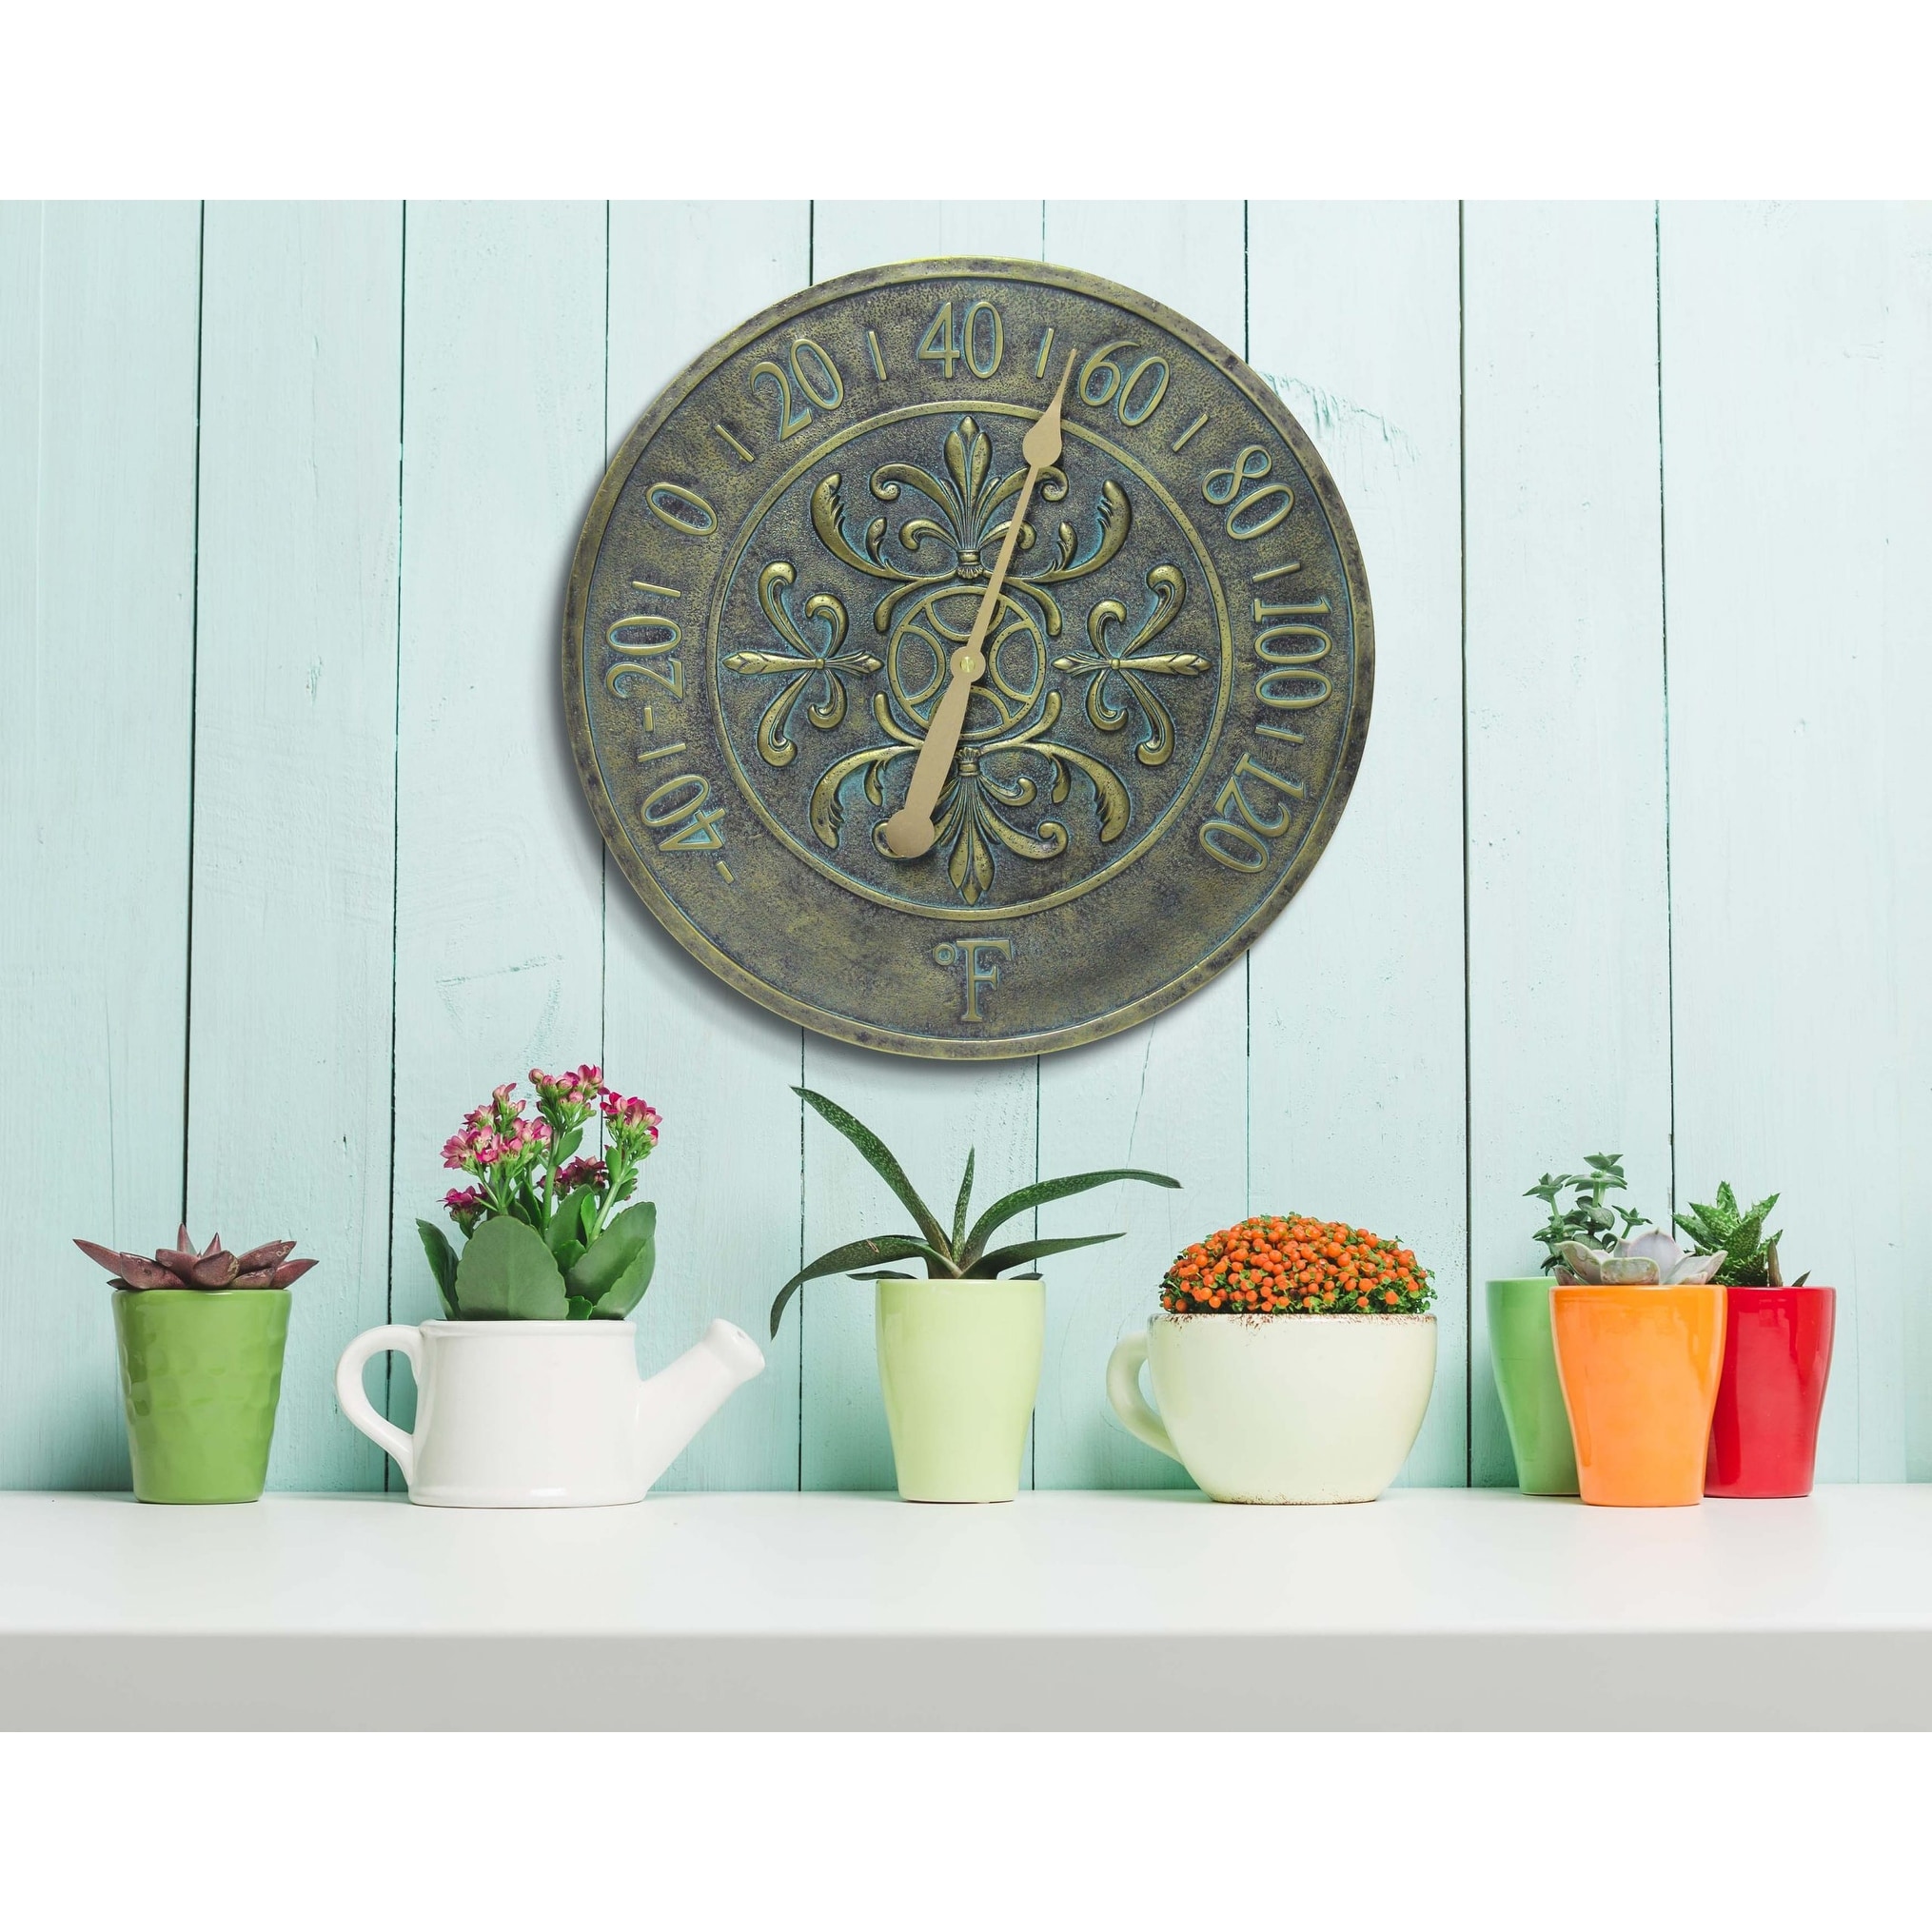 15 x 2.5 Big & Bold Inside or Outside Thermometer Garden Thermometer